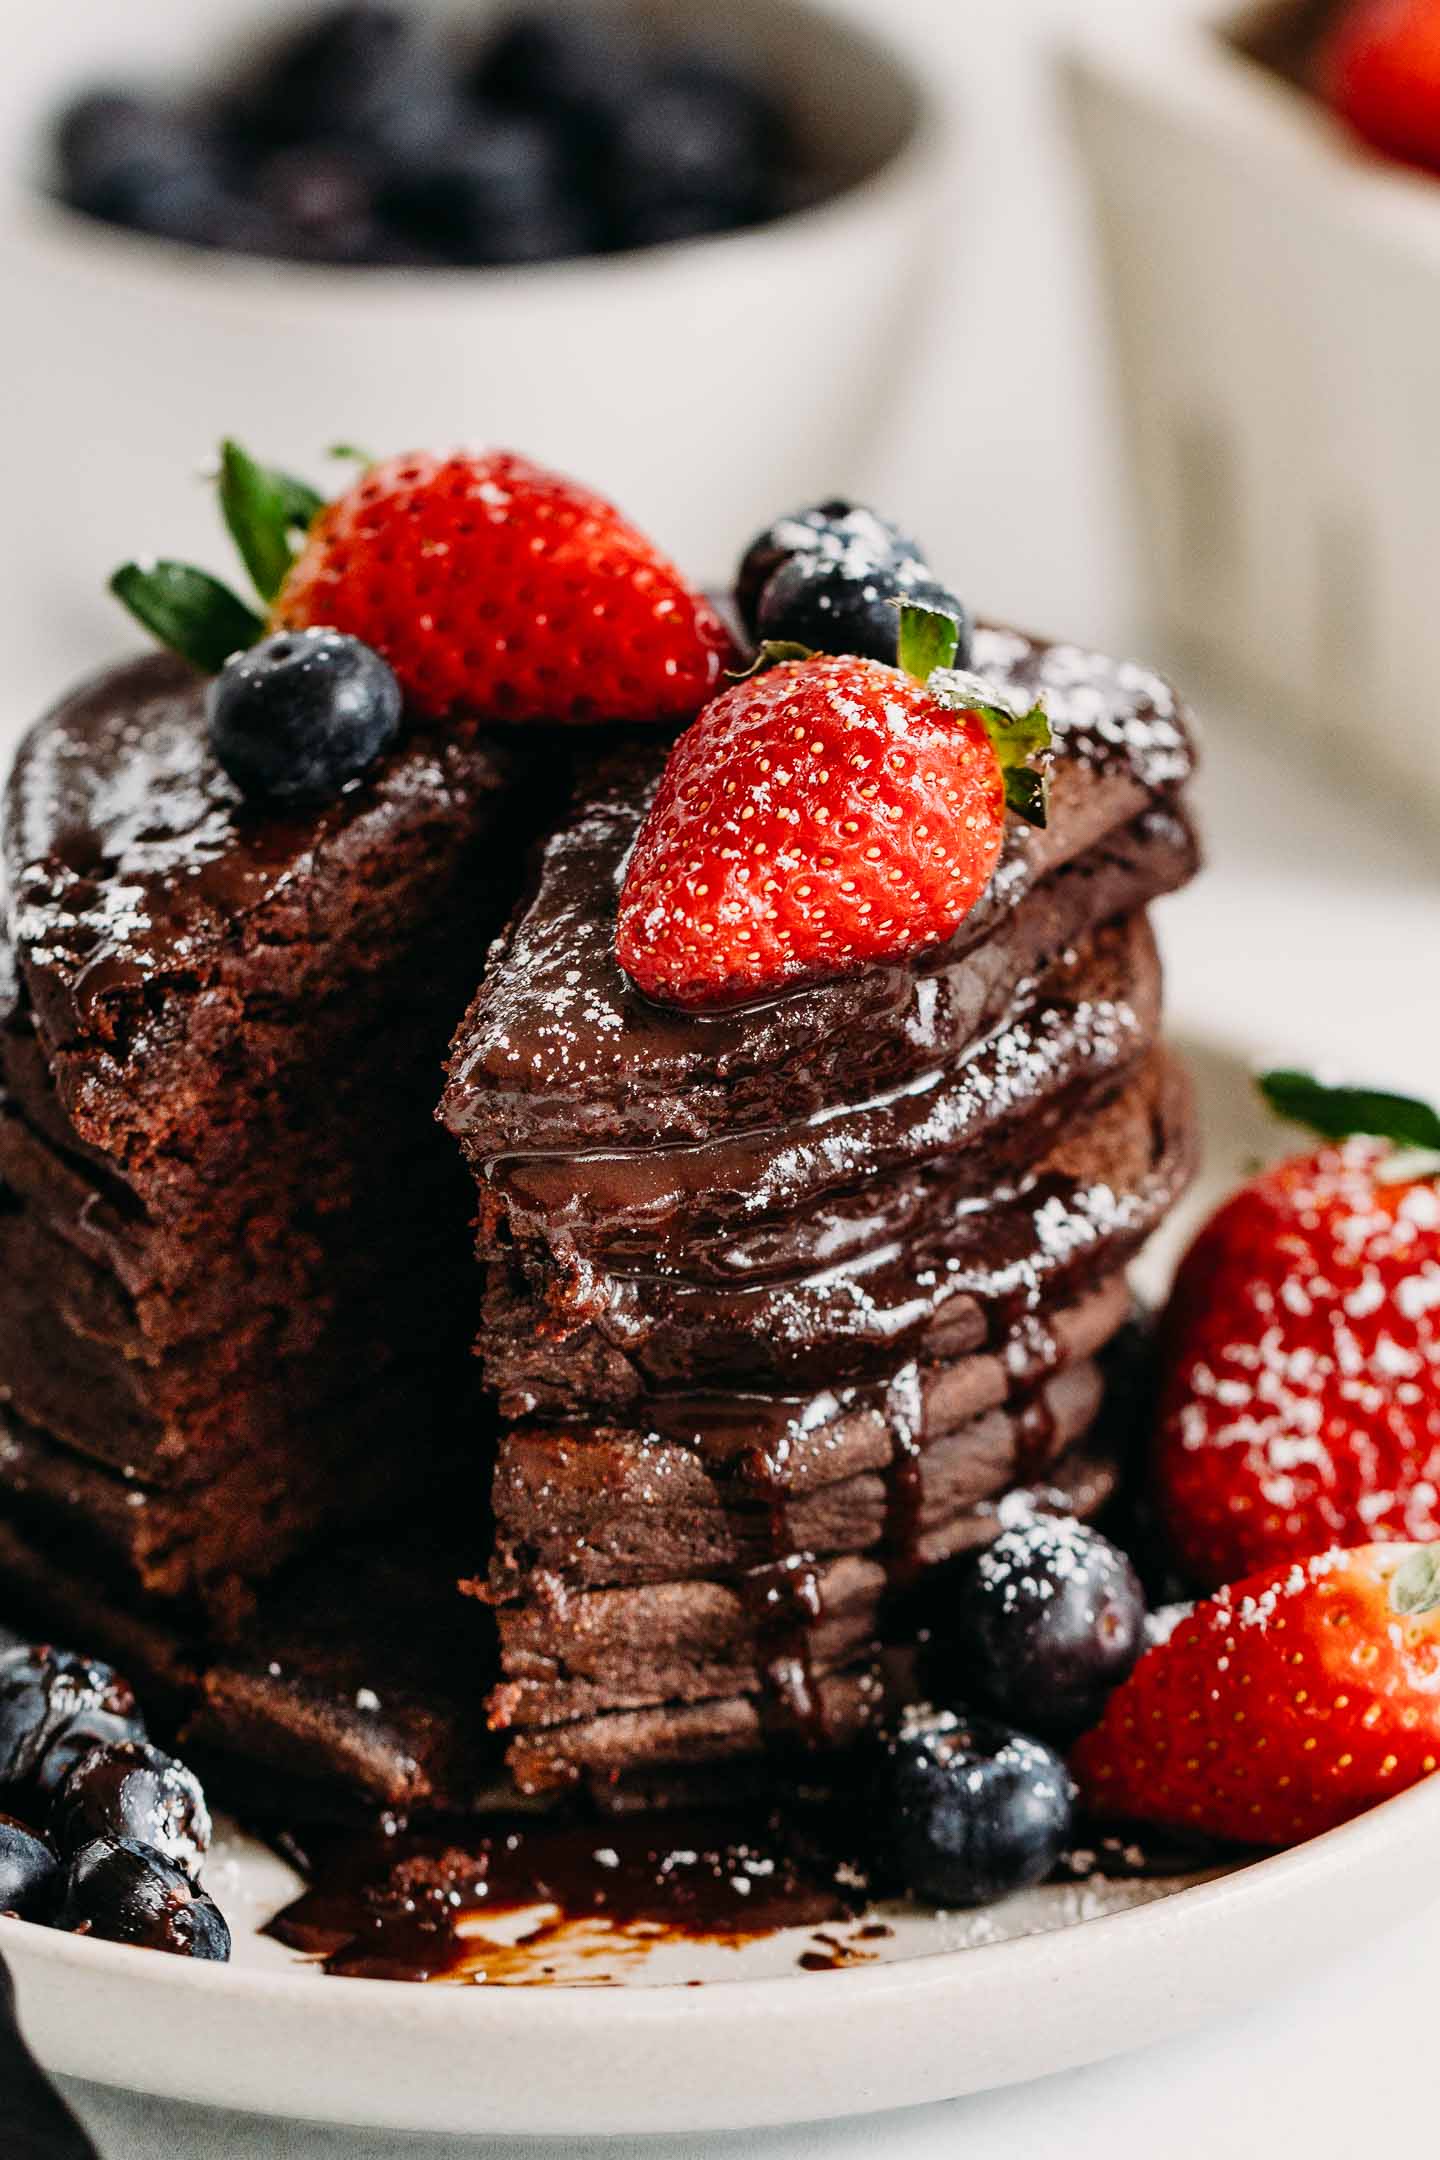 Gluten free chocolate pancakes with fruit and syrup on a plate.